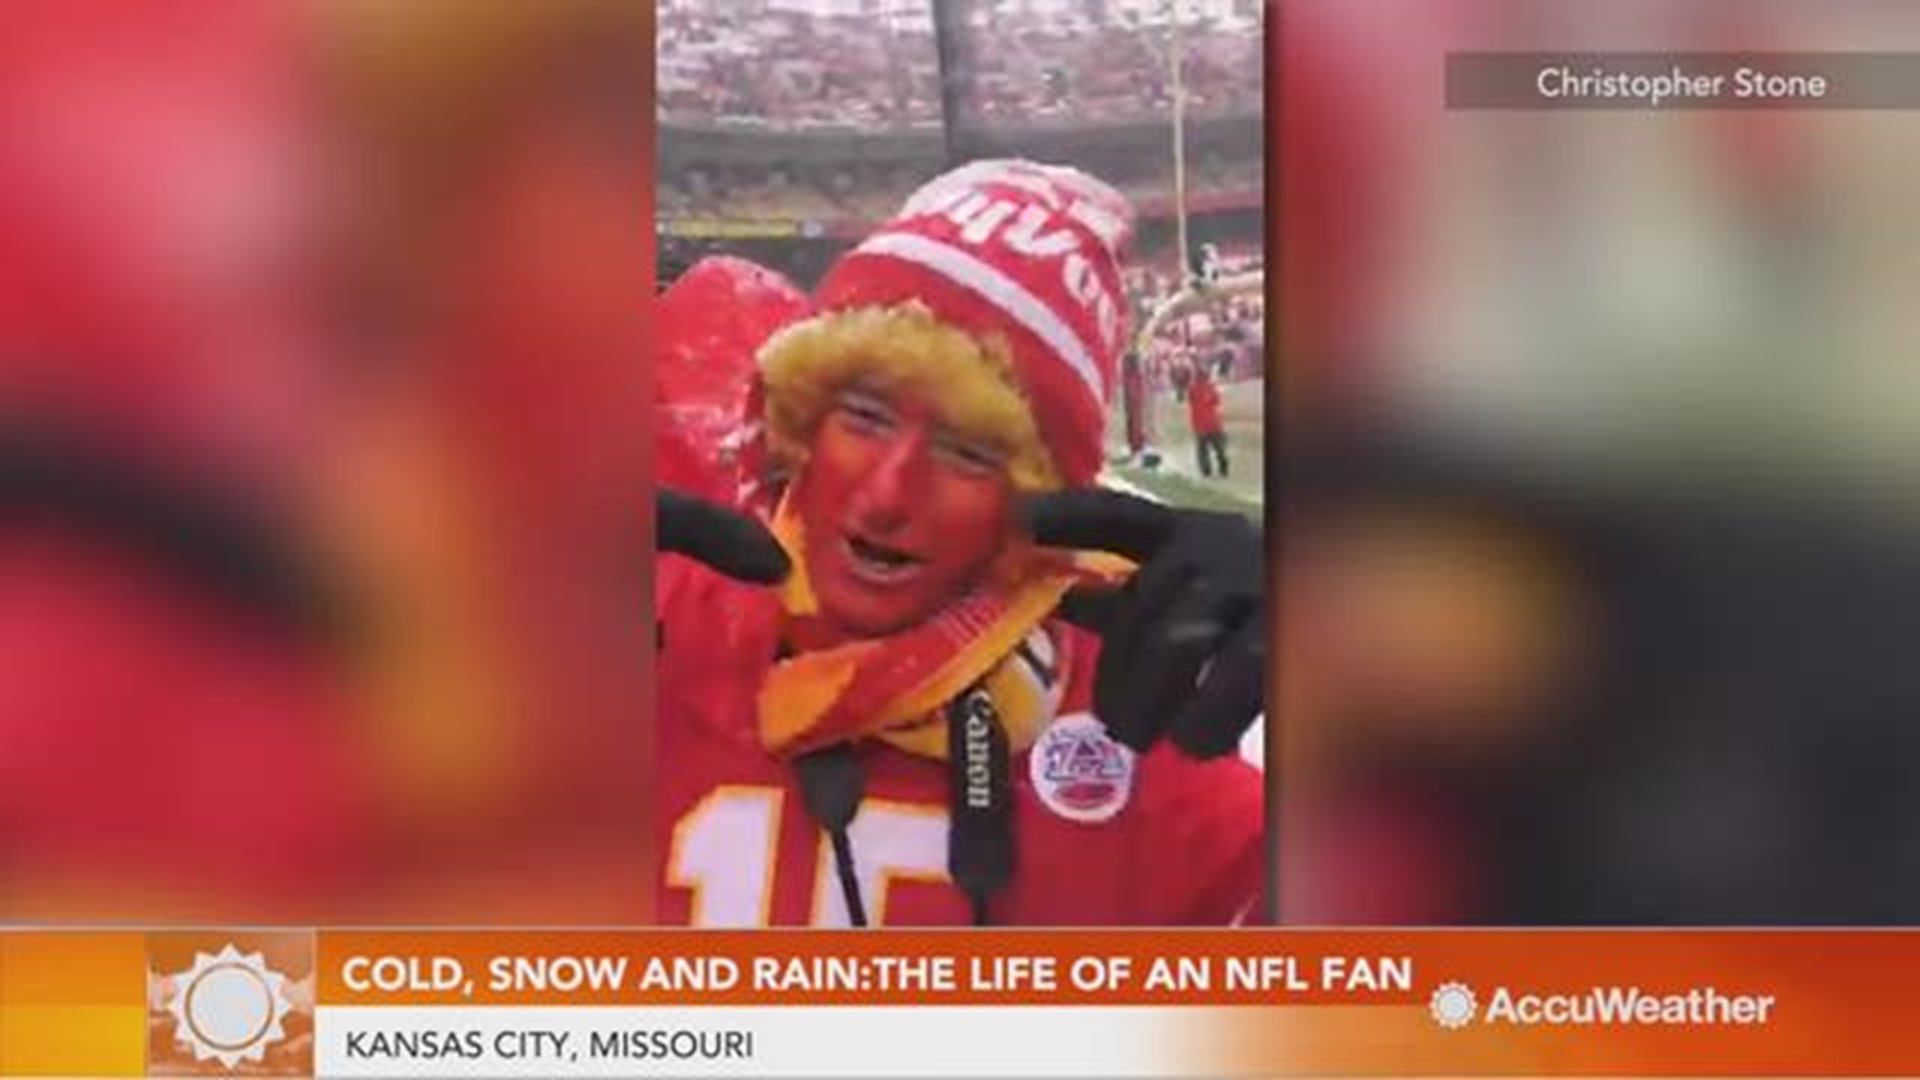 Cold, snow and rain can make or break a football game, but what about the fans who brave all kinds of weather to cheer on their favorite teams? Accuweather takes a look inside the life of an NFL superfan.